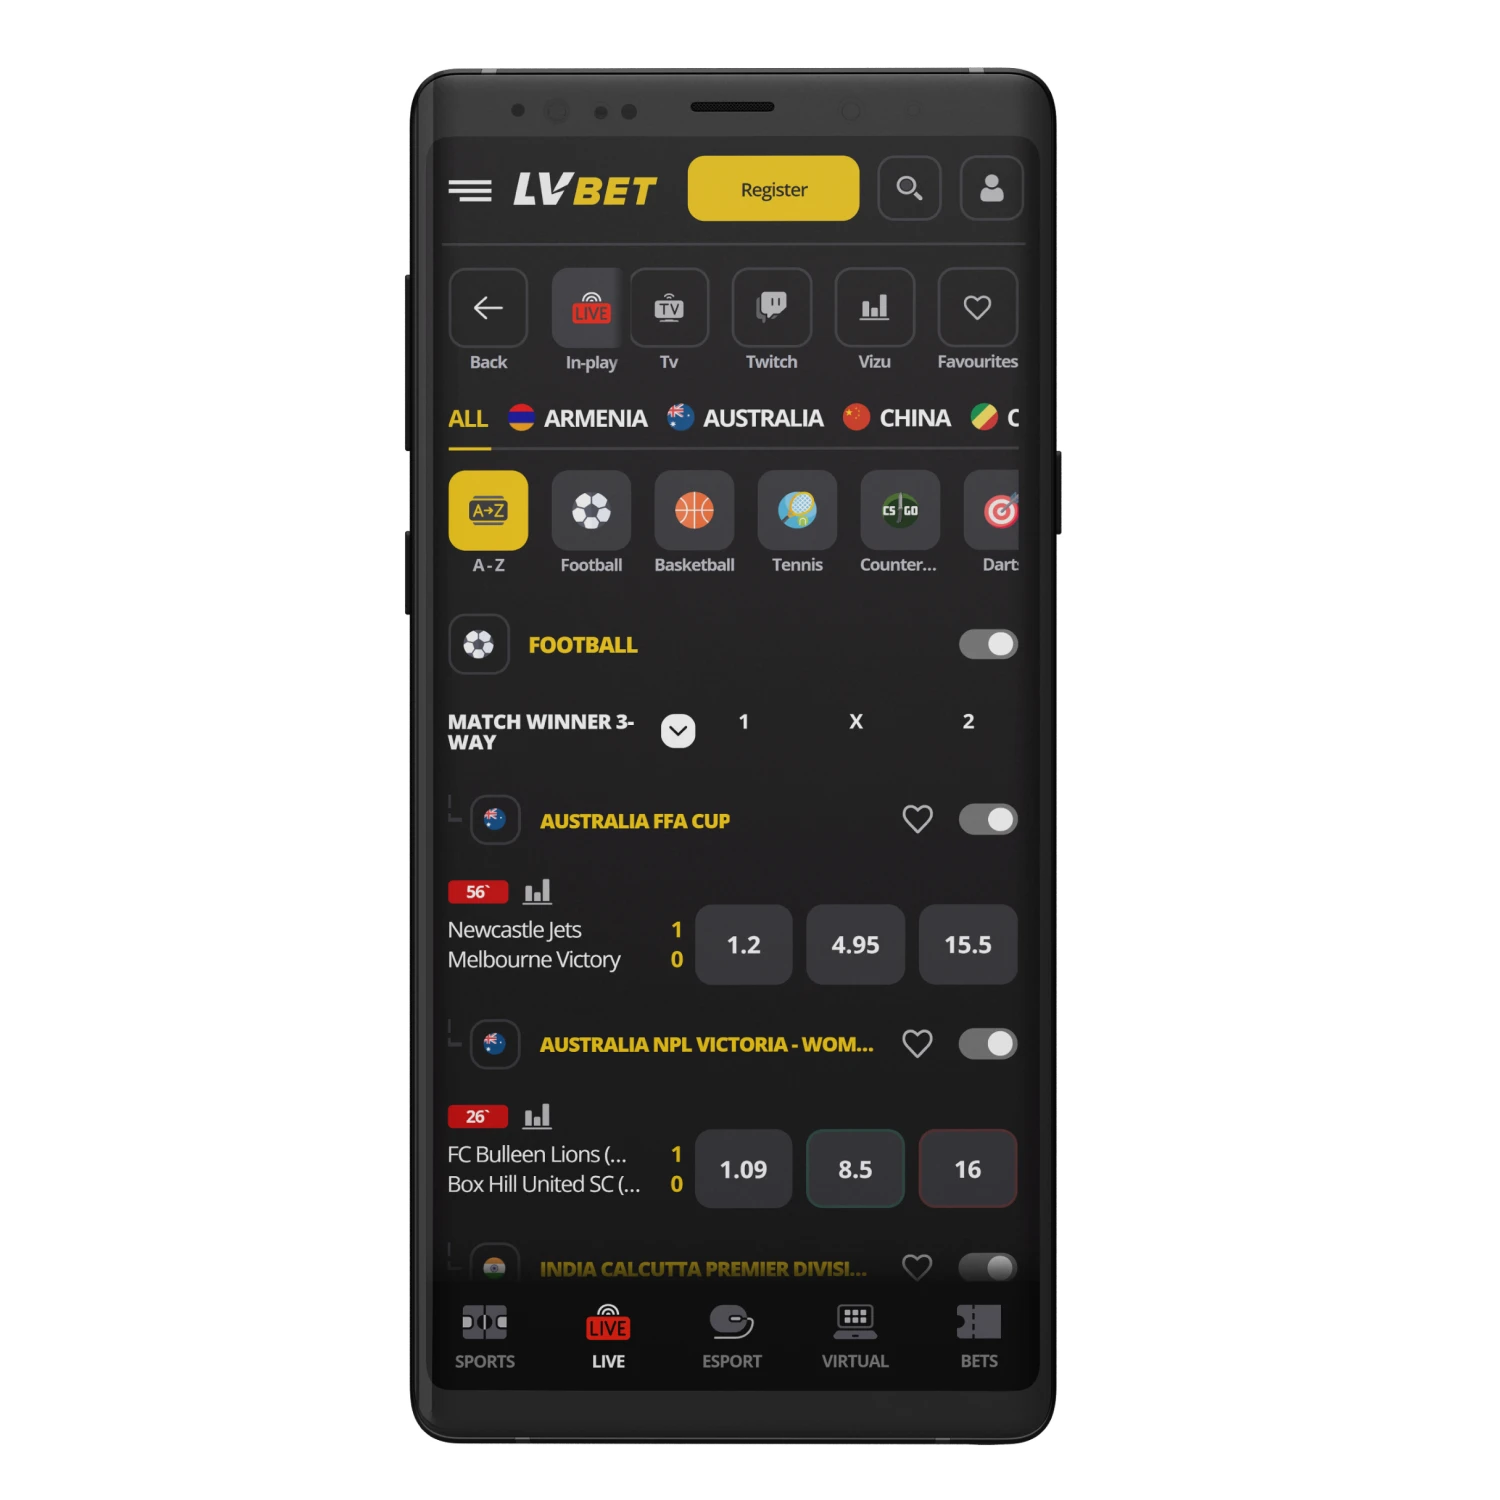 With the LV Bet app, play casino games and bet anywhere.